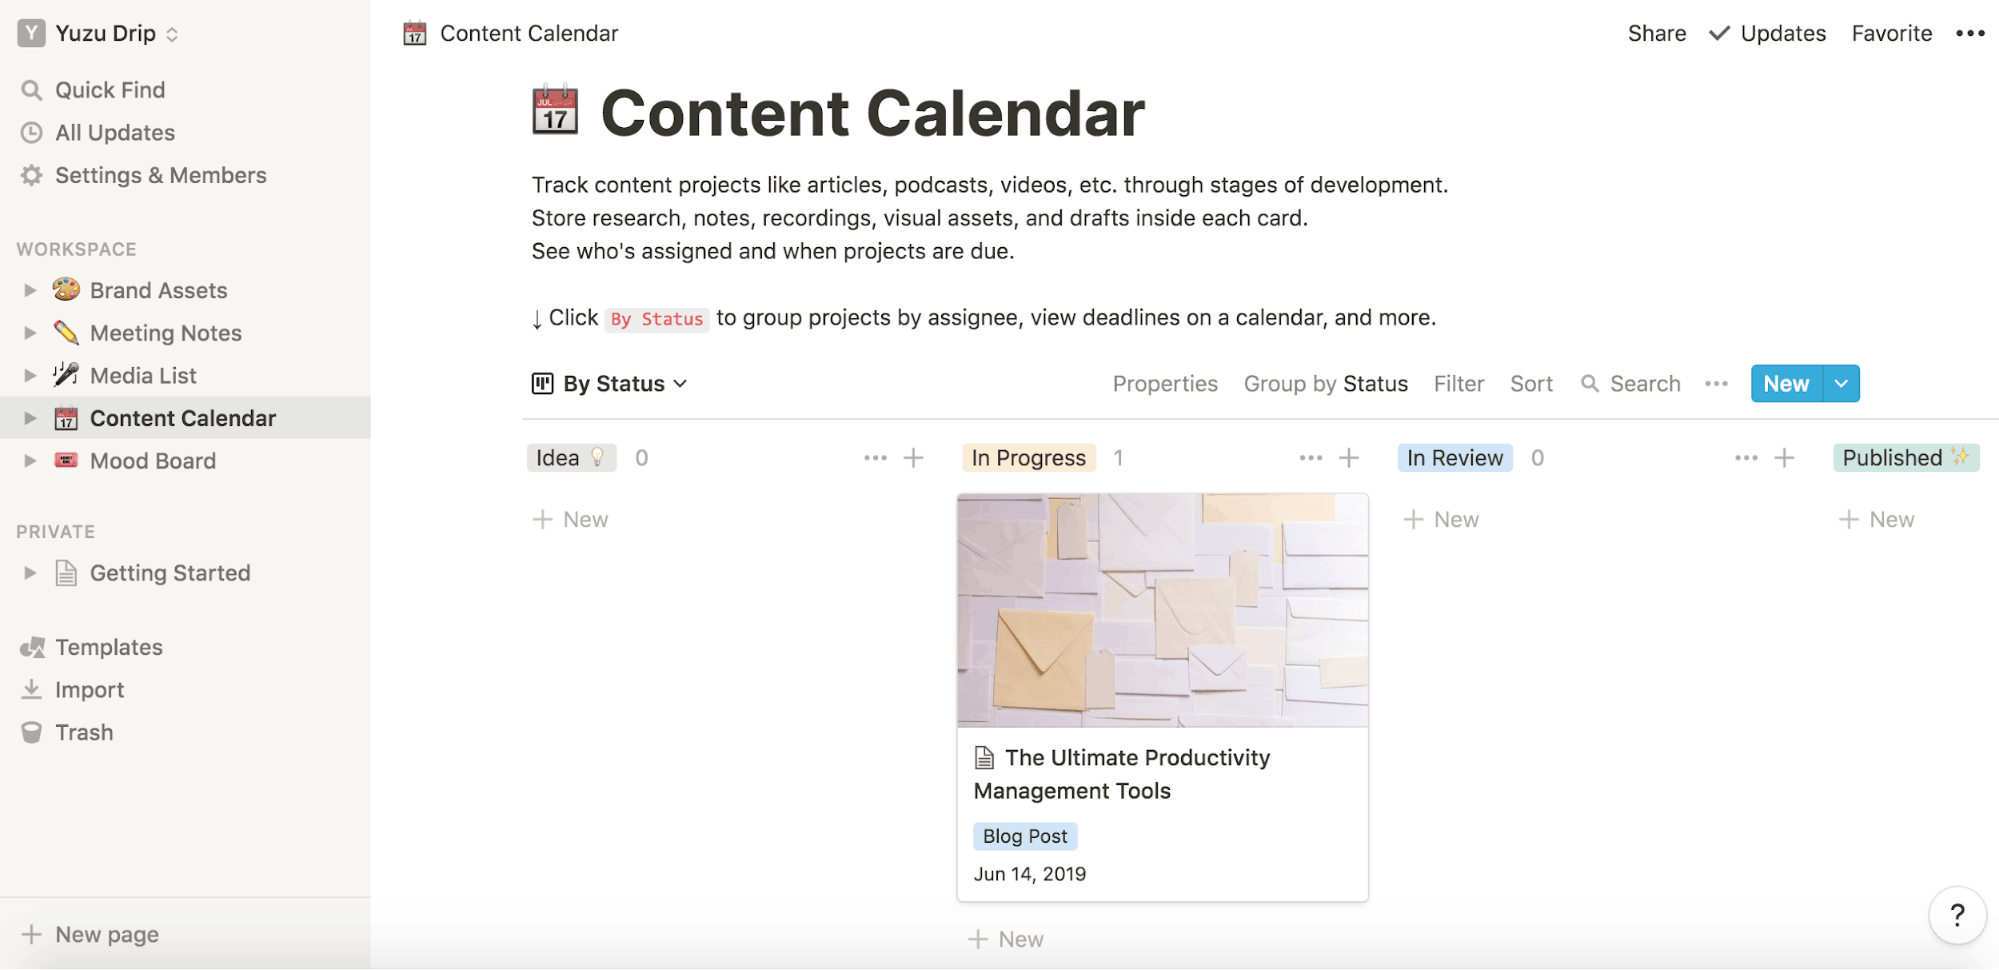 Time management tools - Notion content calender